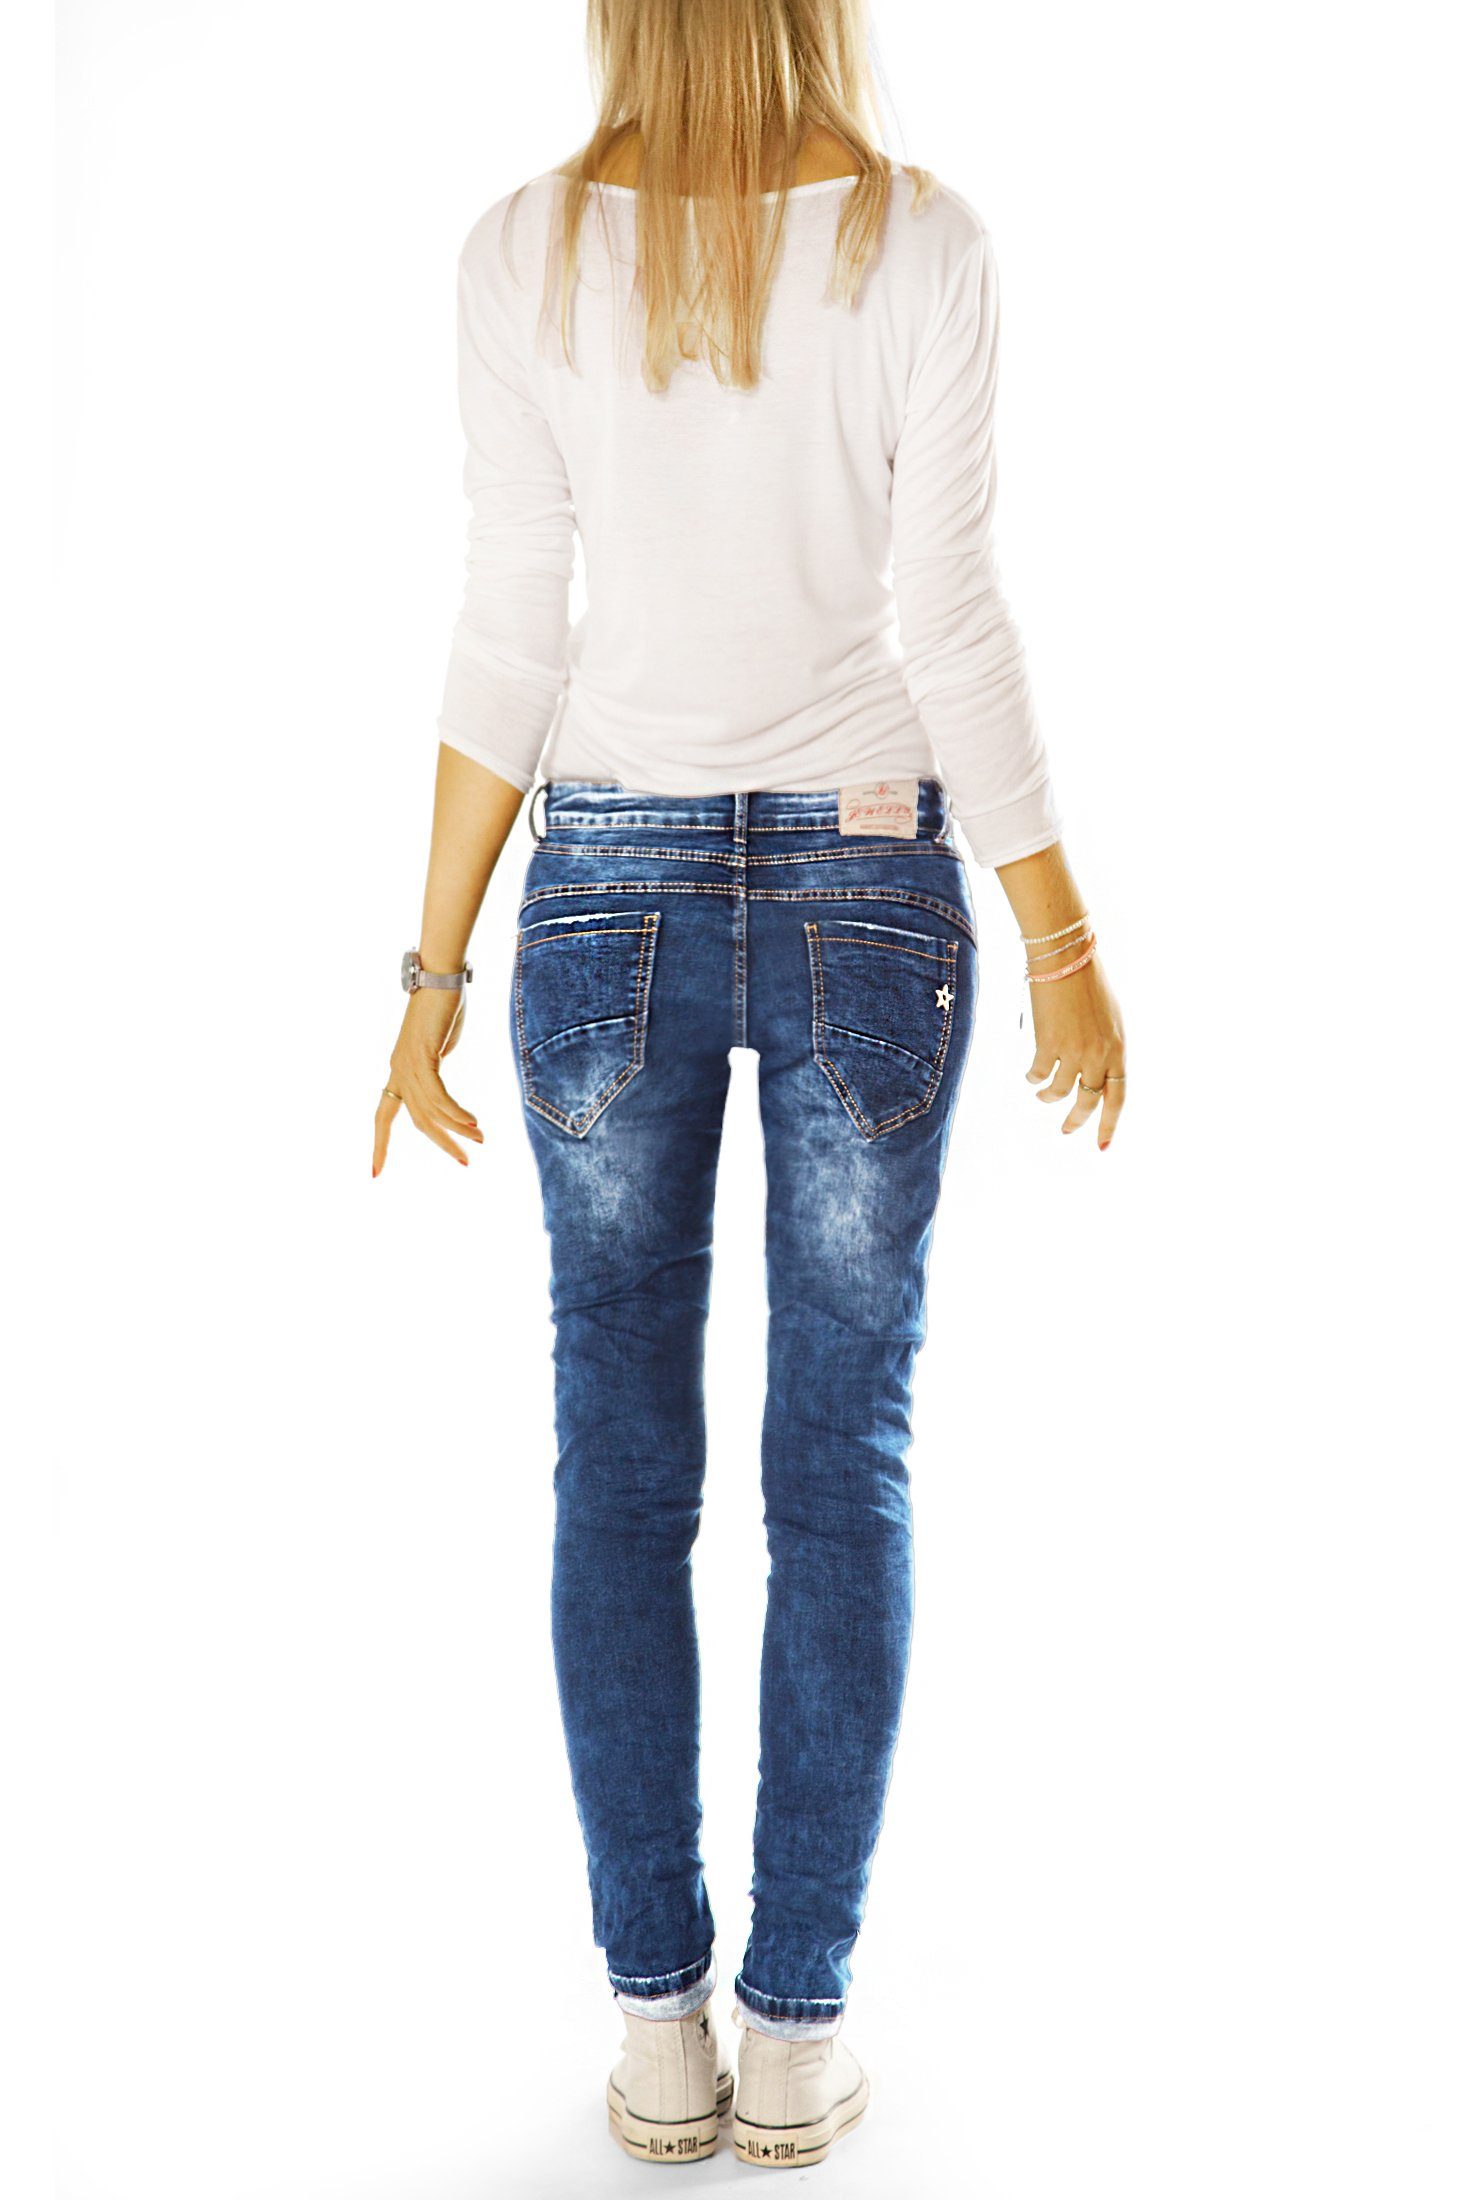 Stretch-Anteil, styled Slim-fit-Jeans mit Look Hose Fit - be Damen Hüftjeans j4g-1 5-Pocket-Style Relaxed Slim im - Fit